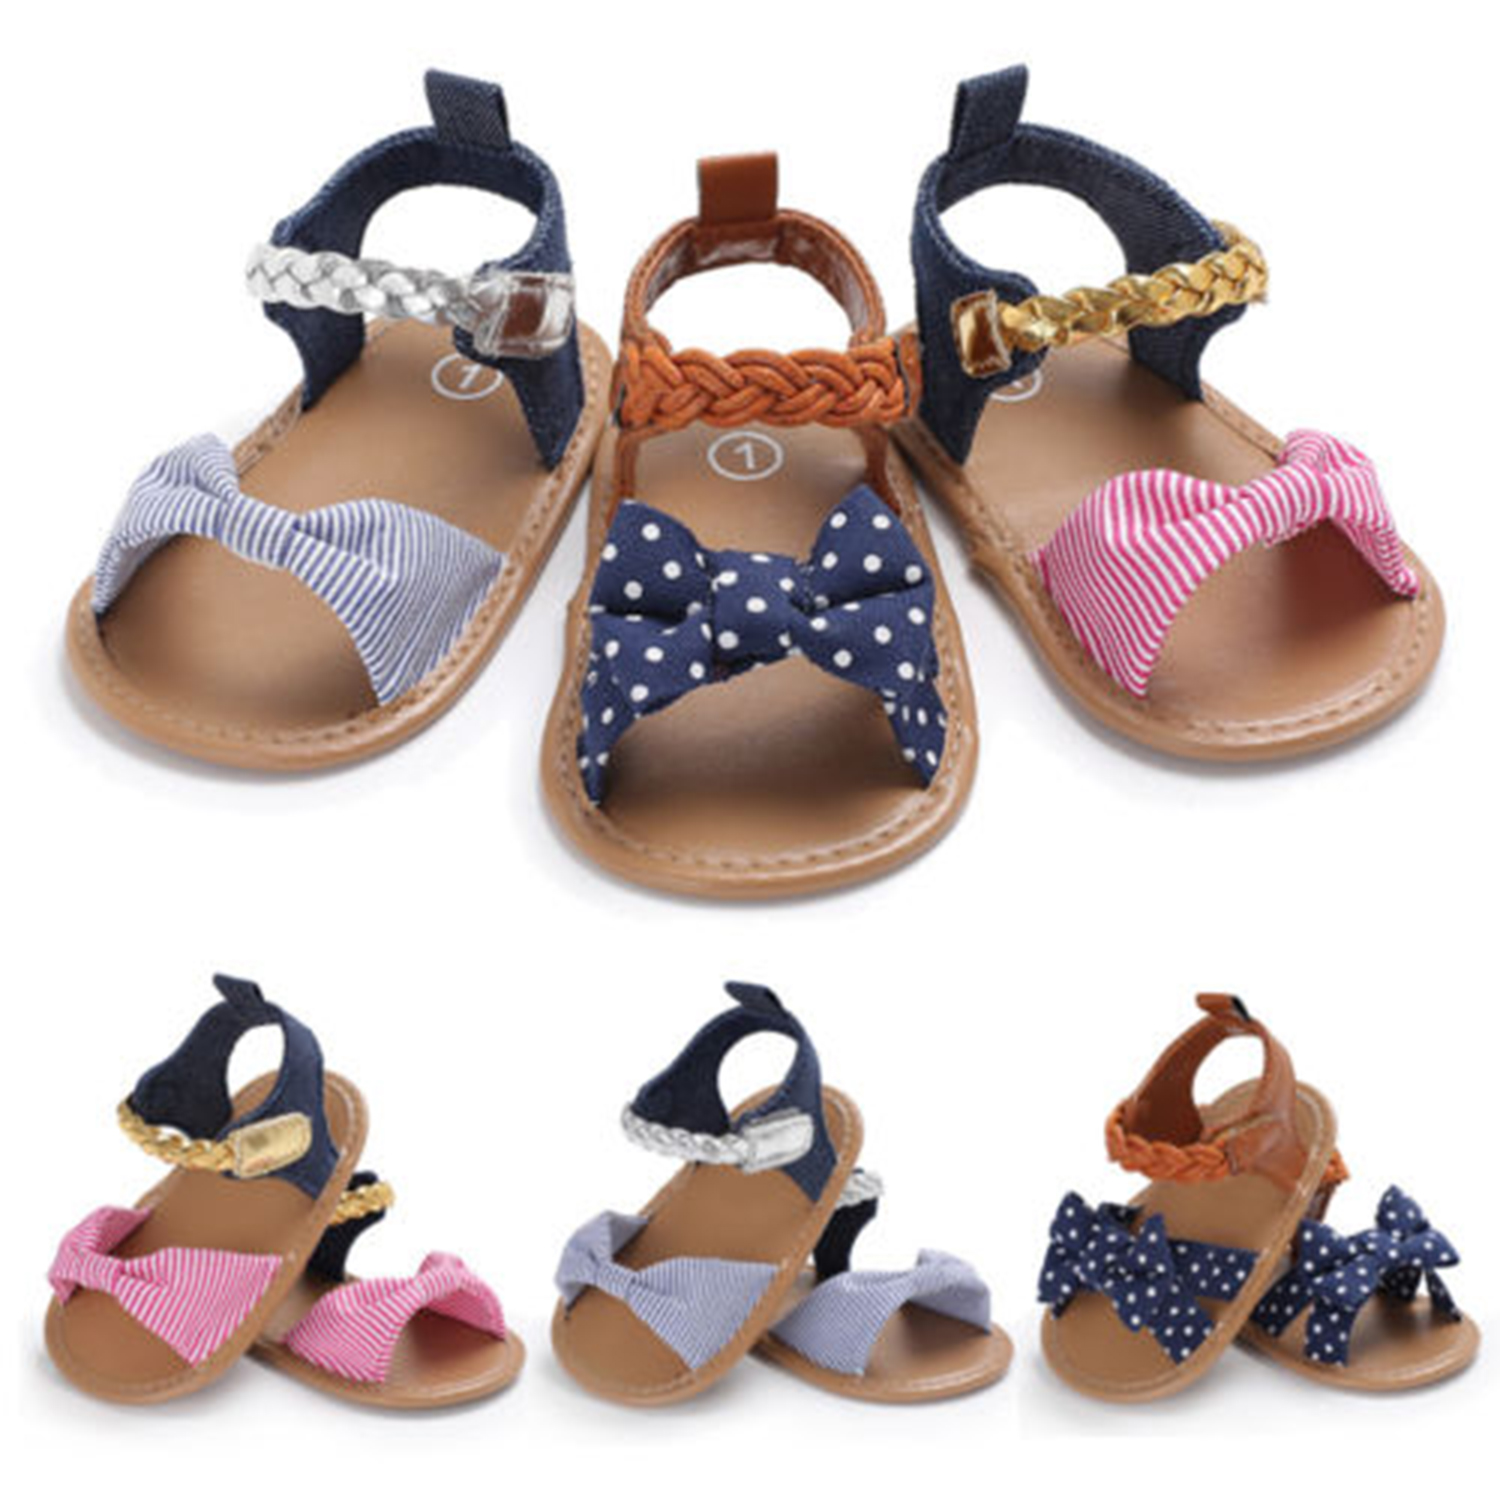 Styles I Love Baby Toddler Girl Bowknot Sandals Soft Sole Anti-slip Crib Shoes Prewalker 0-18M, 5 Colors (Navy + Dots, 6-12 Months) - image 2 of 4